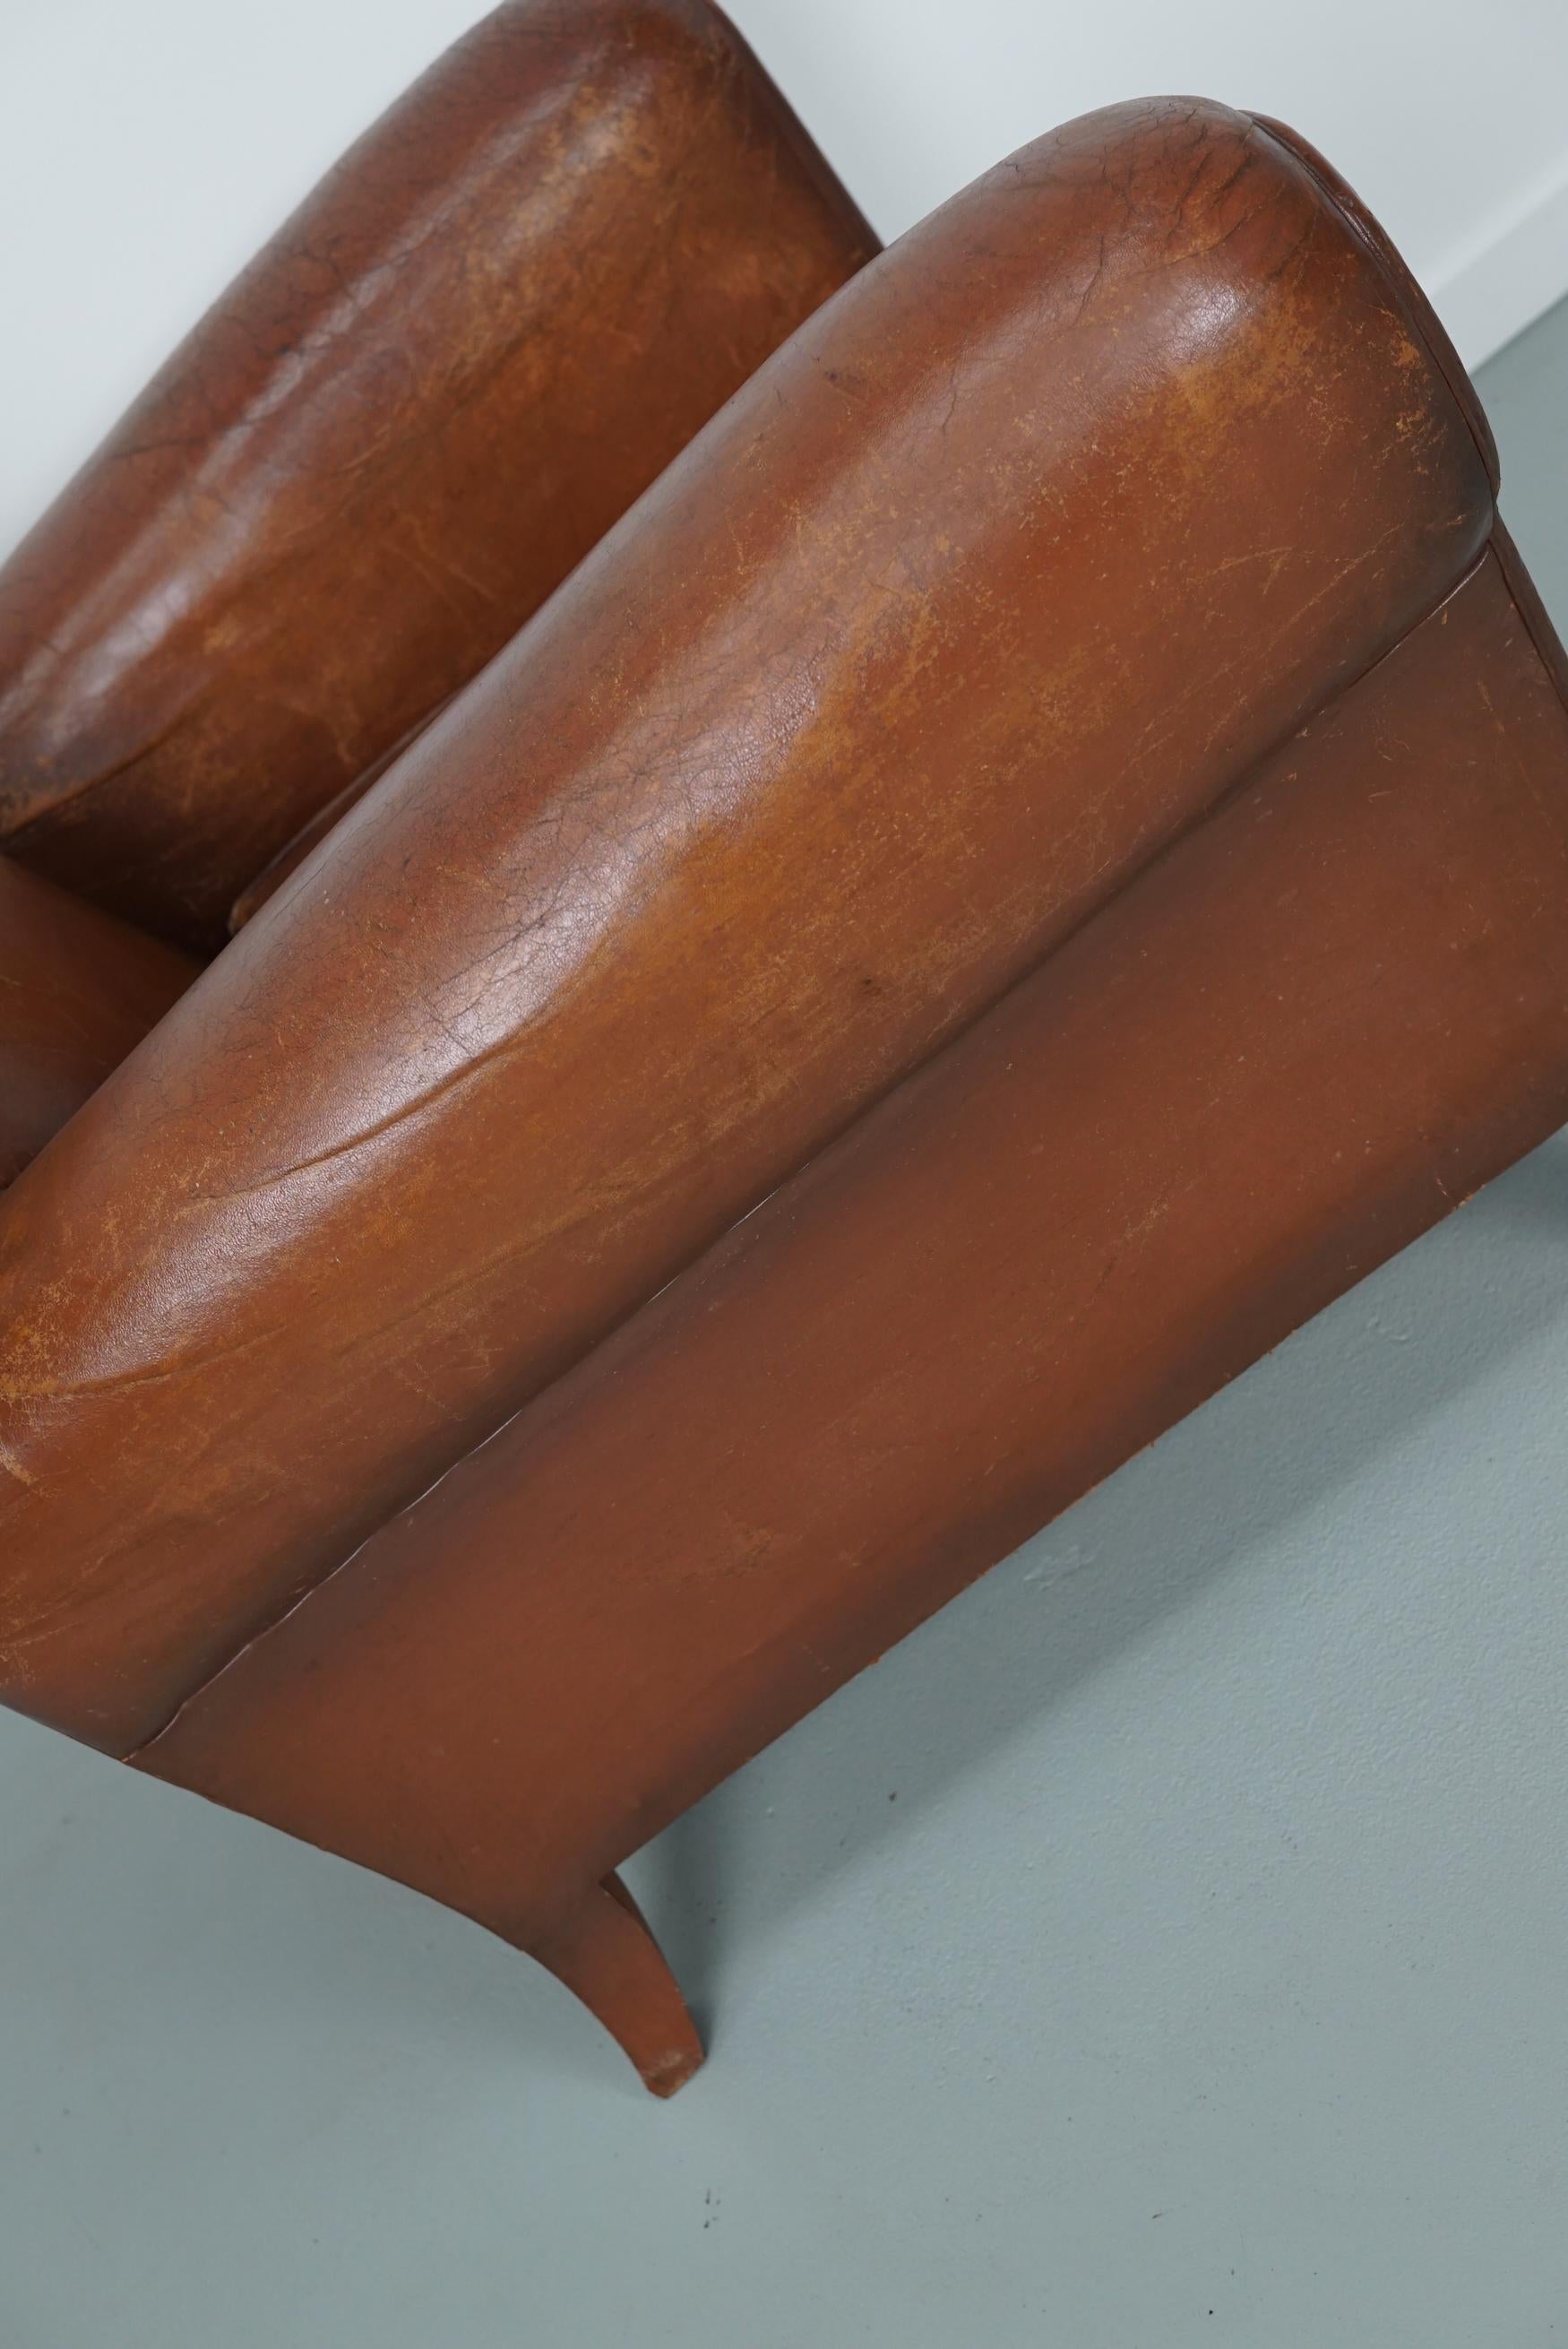 Vintage French Moustache Back Cognac-Colored Leather Club Chair, 1940s 7